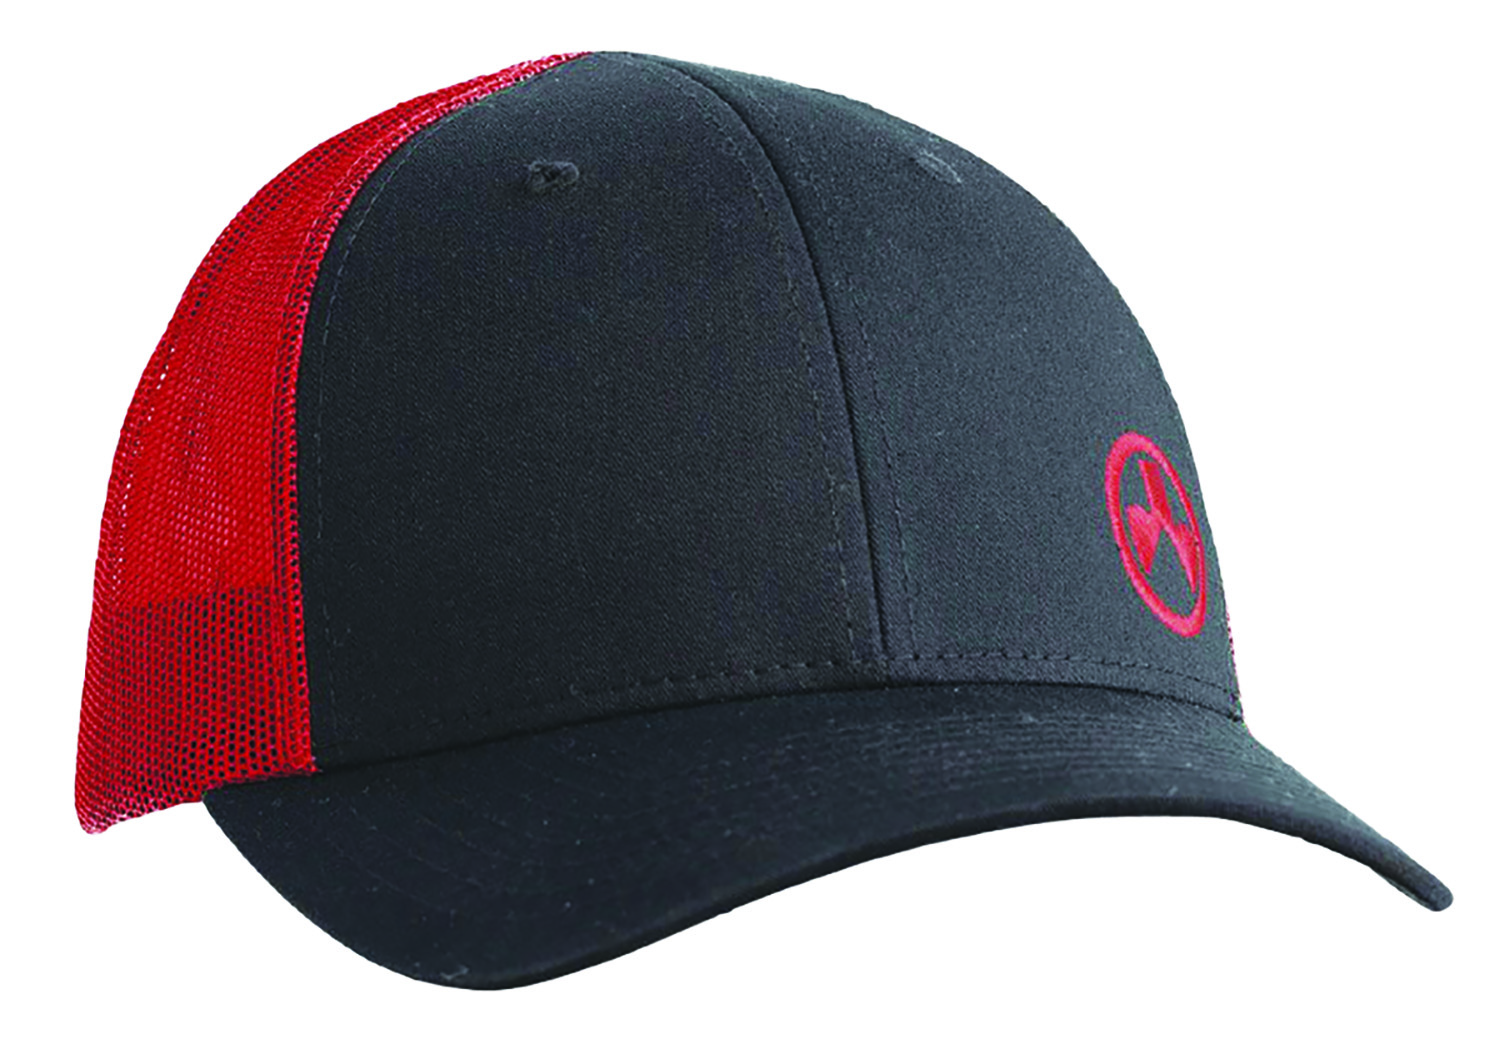 MAGPUL ICON TRCKR HAT M/L RED/BLK